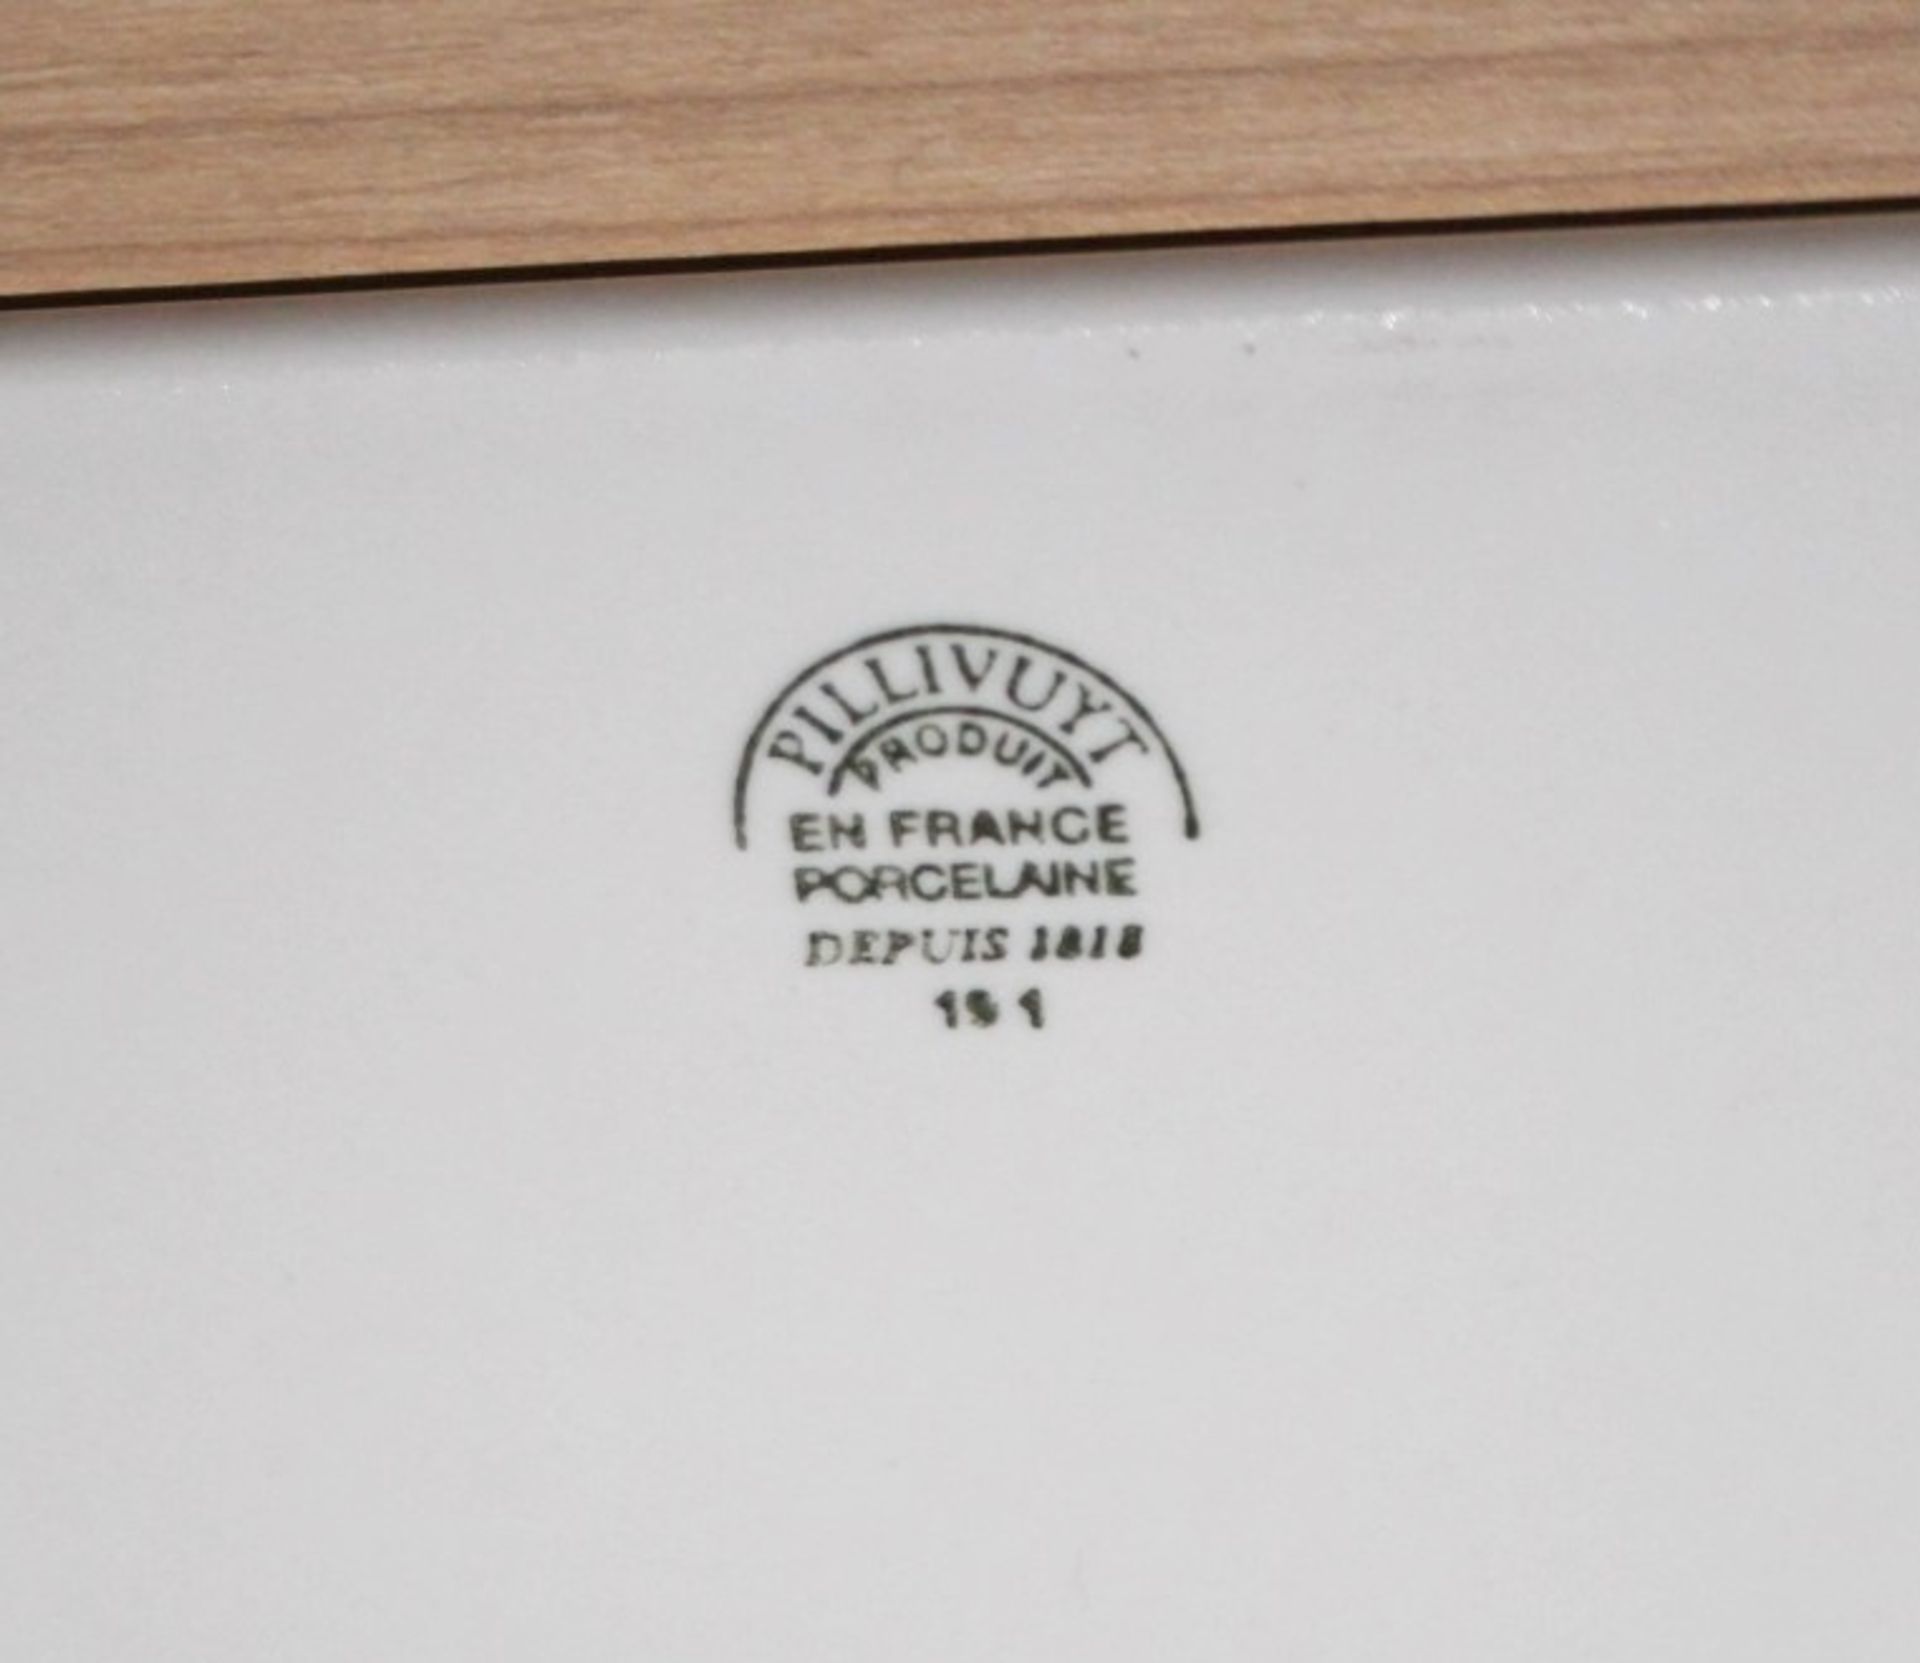 12 x PILLIVUYT Porcelain Rectangular Serving Trays In White Featuring 'Famous Branding' In Gold - - Image 2 of 7